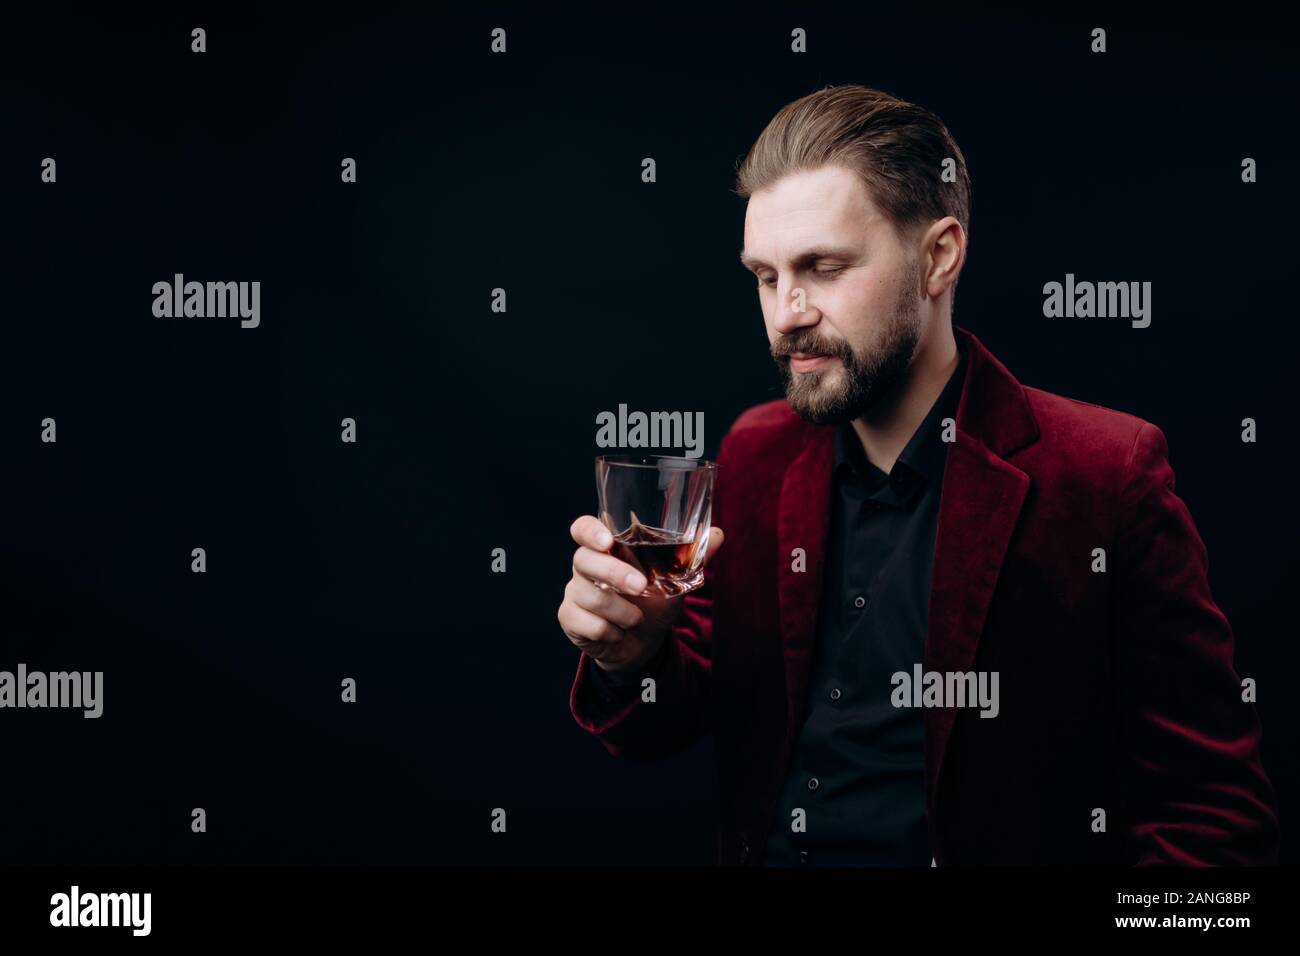 Stylish Man in Velvet Jacket Looking at His Drink Stock Photo